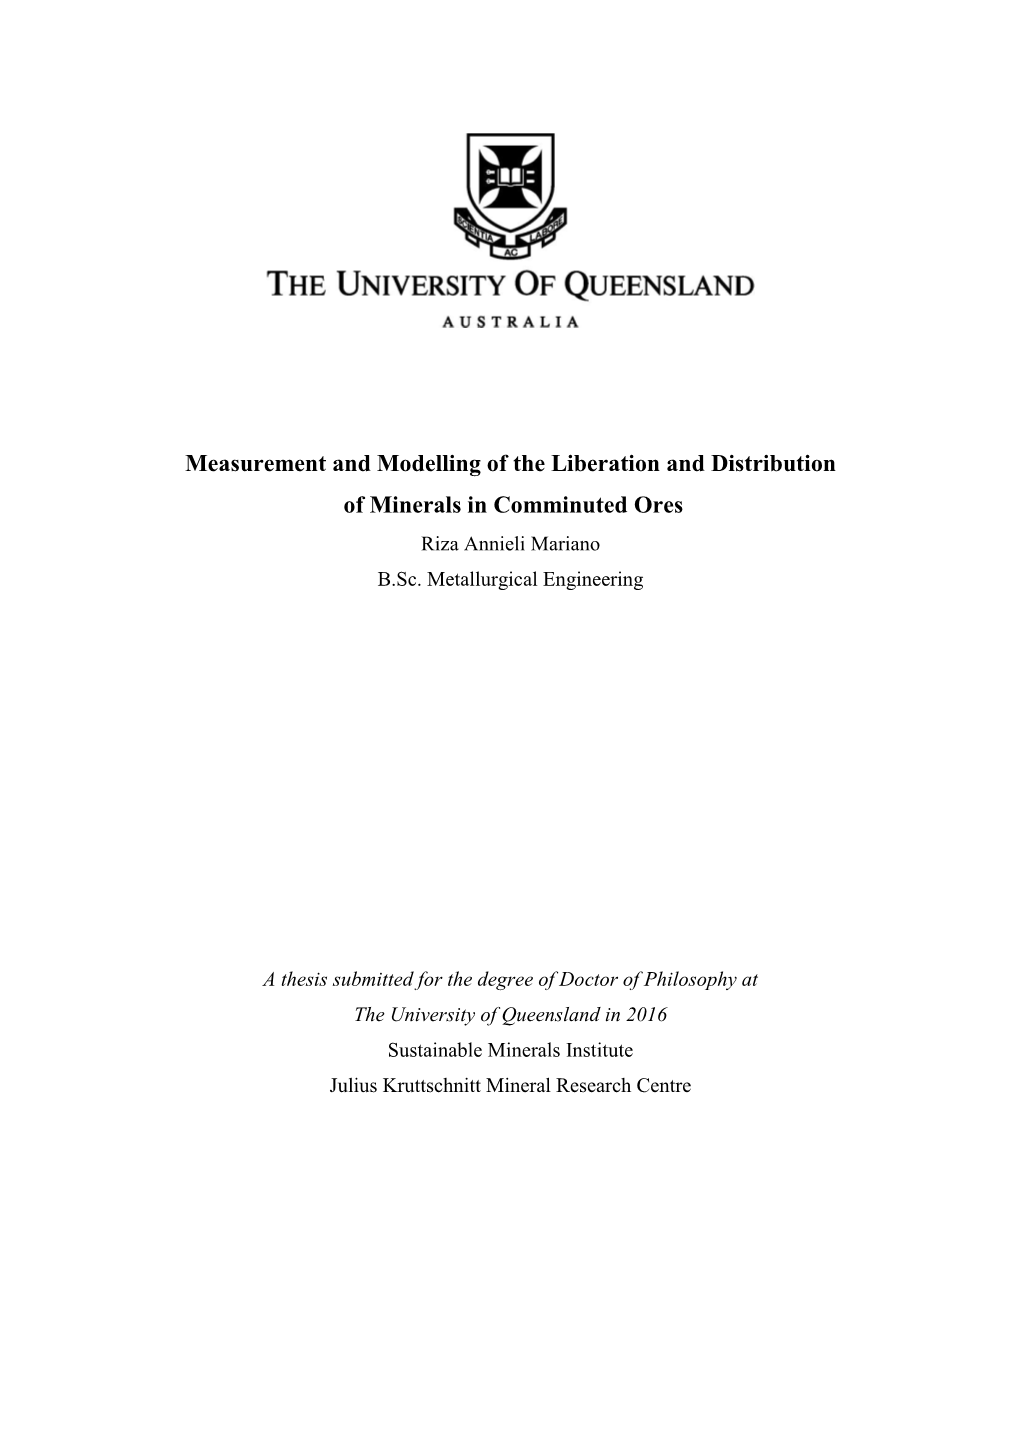 Measurement and Modelling of the Liberation and Distribution of Minerals in Comminuted Ores Riza Annieli Mariano B.Sc